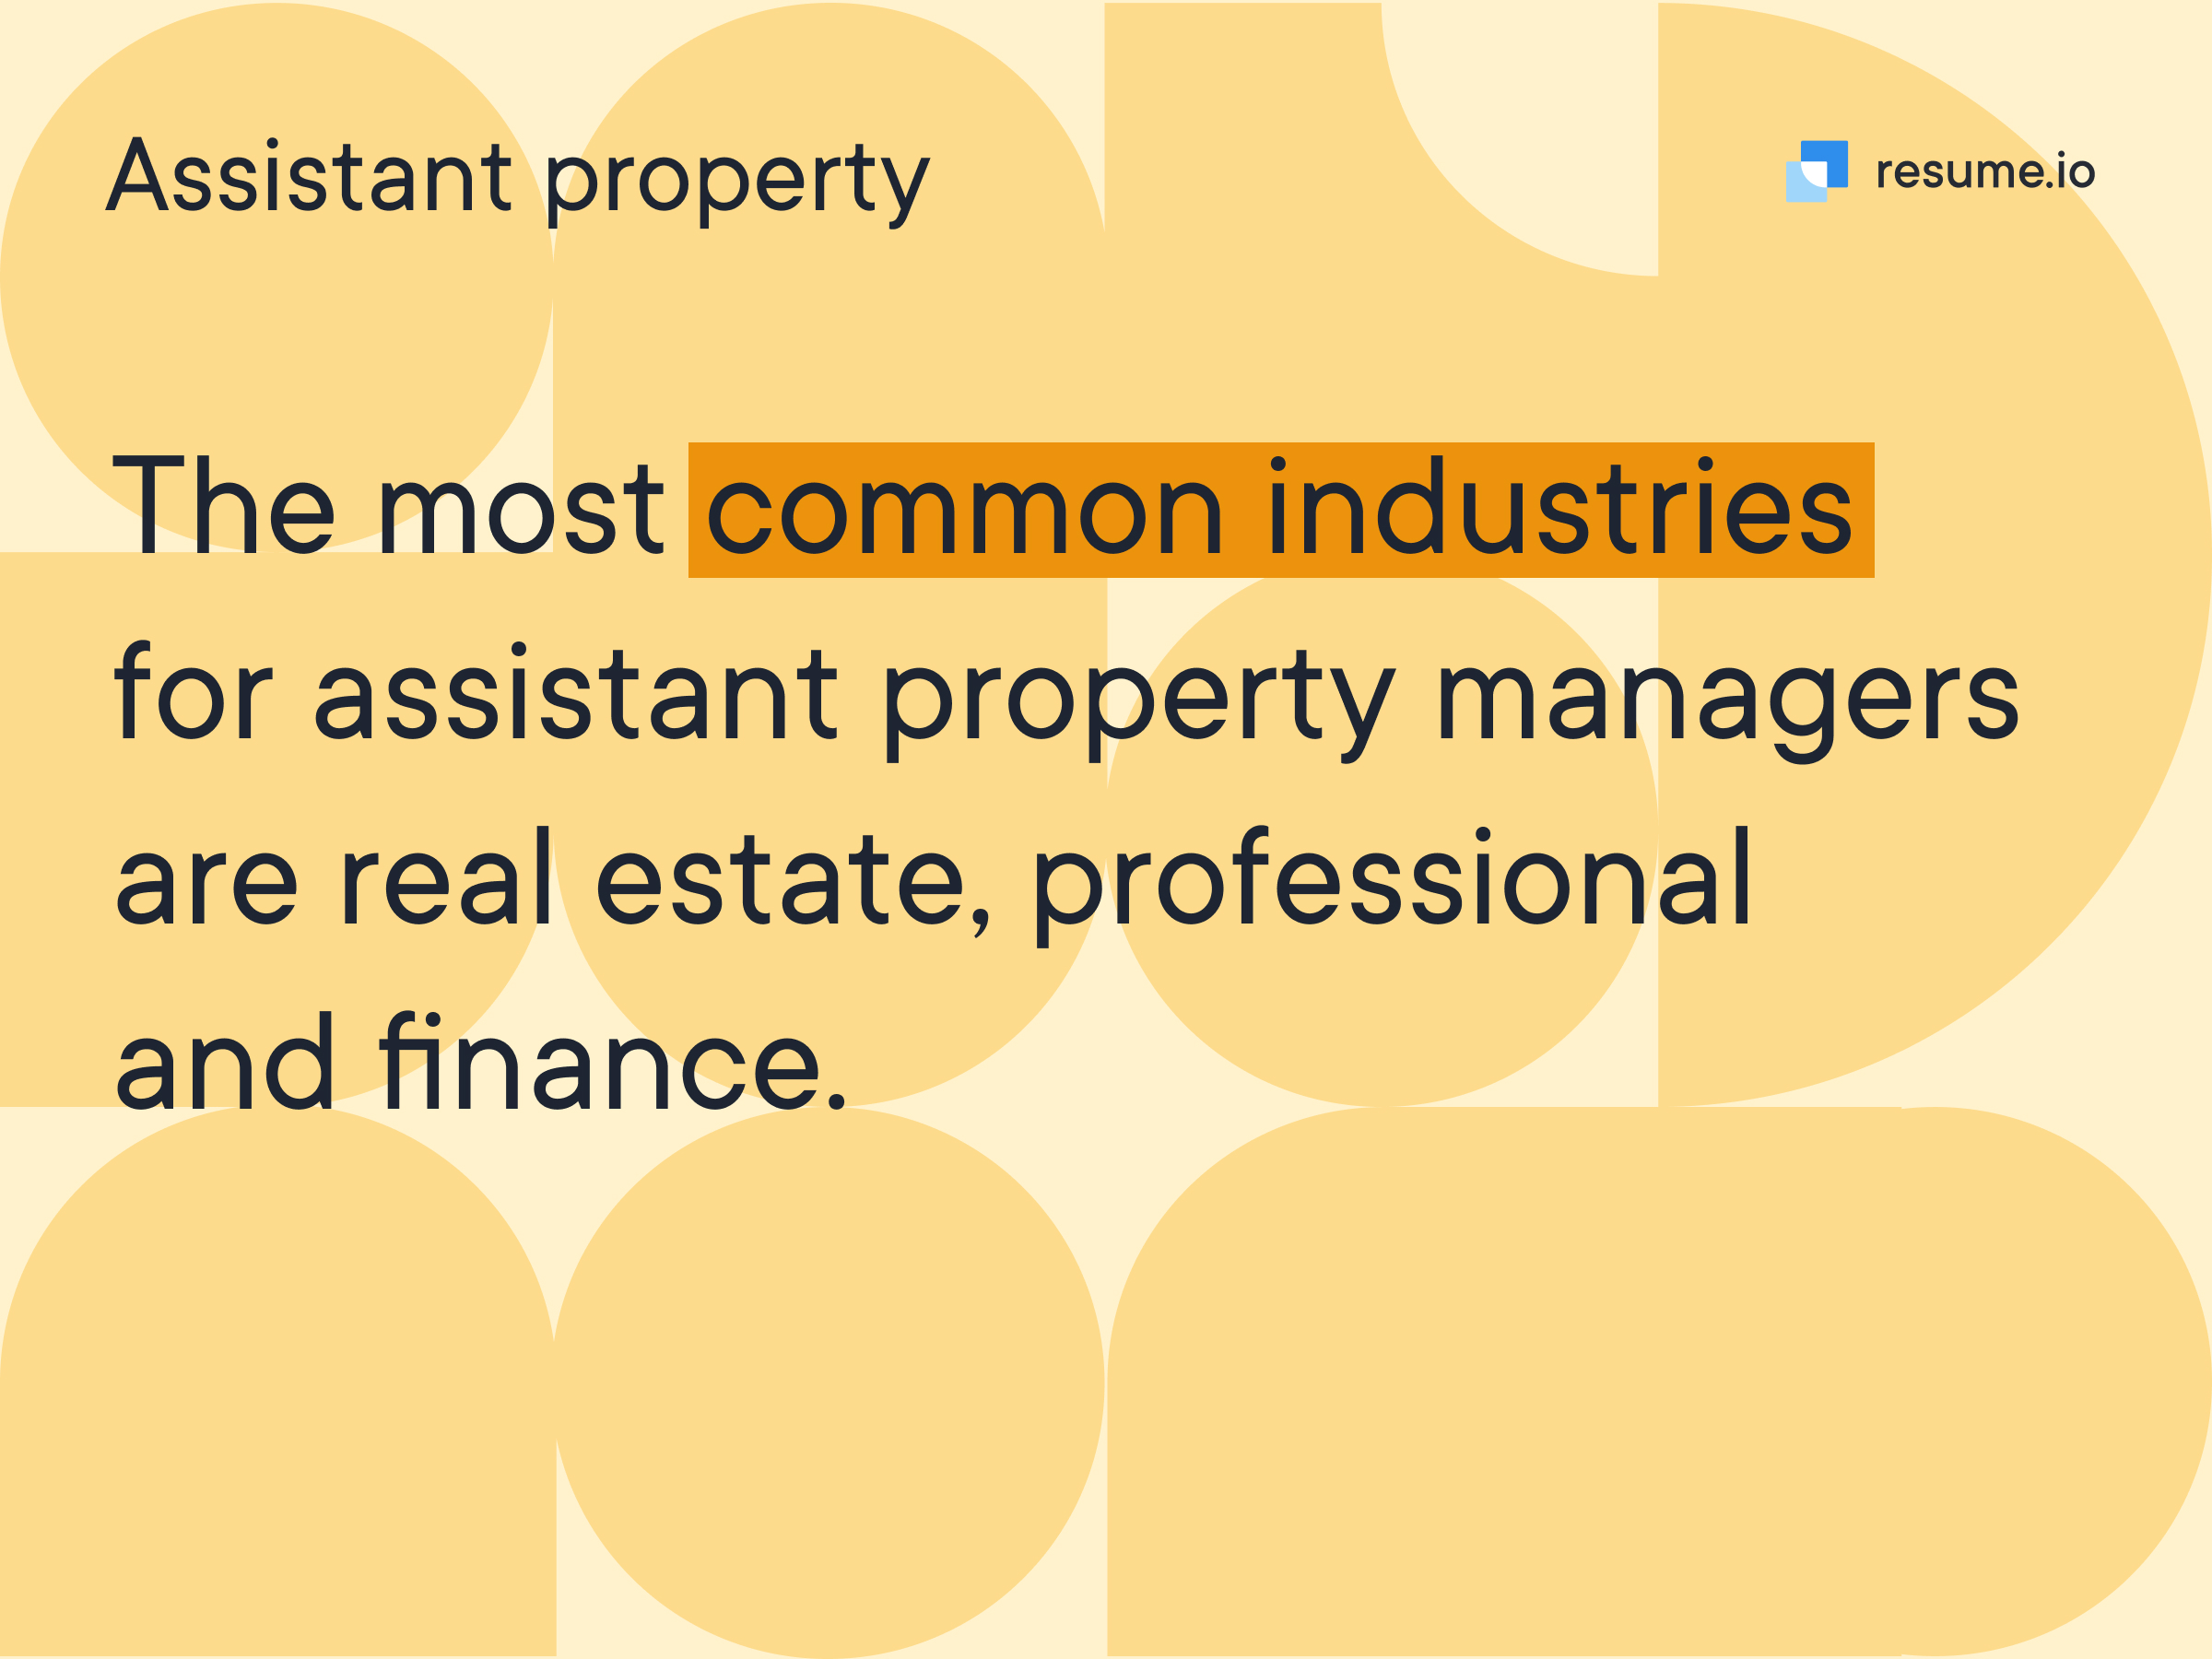 The most common industries for assistant property managers are real estate, professional and finance